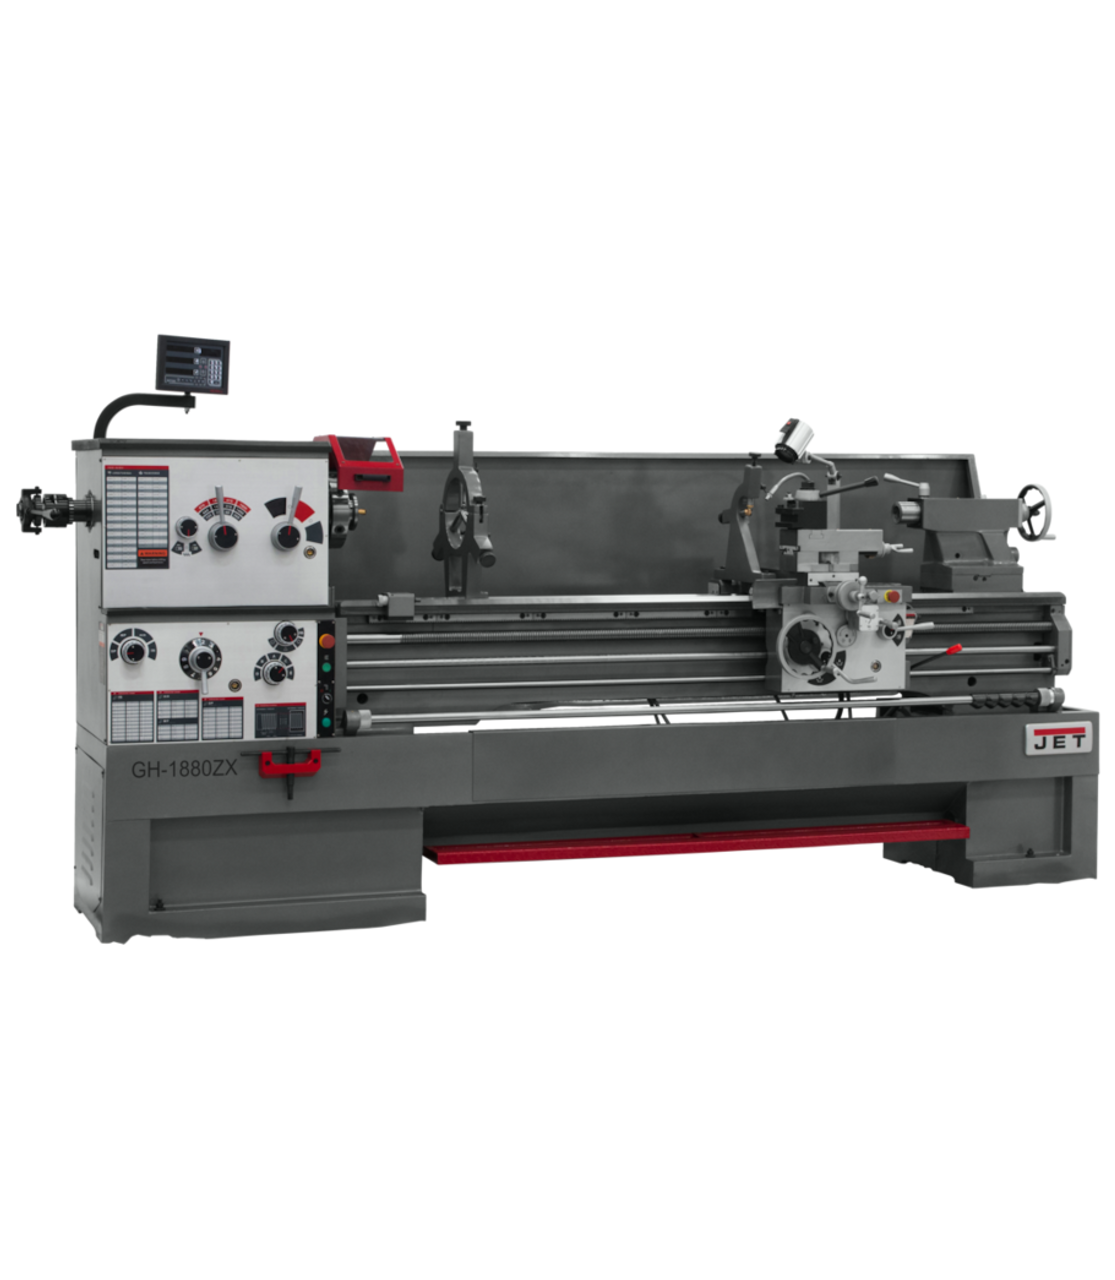 JET GH-1880ZX Large Spindle Bore Lathe with Newall DP700 with Taper Attachment and Collet Closer 460V